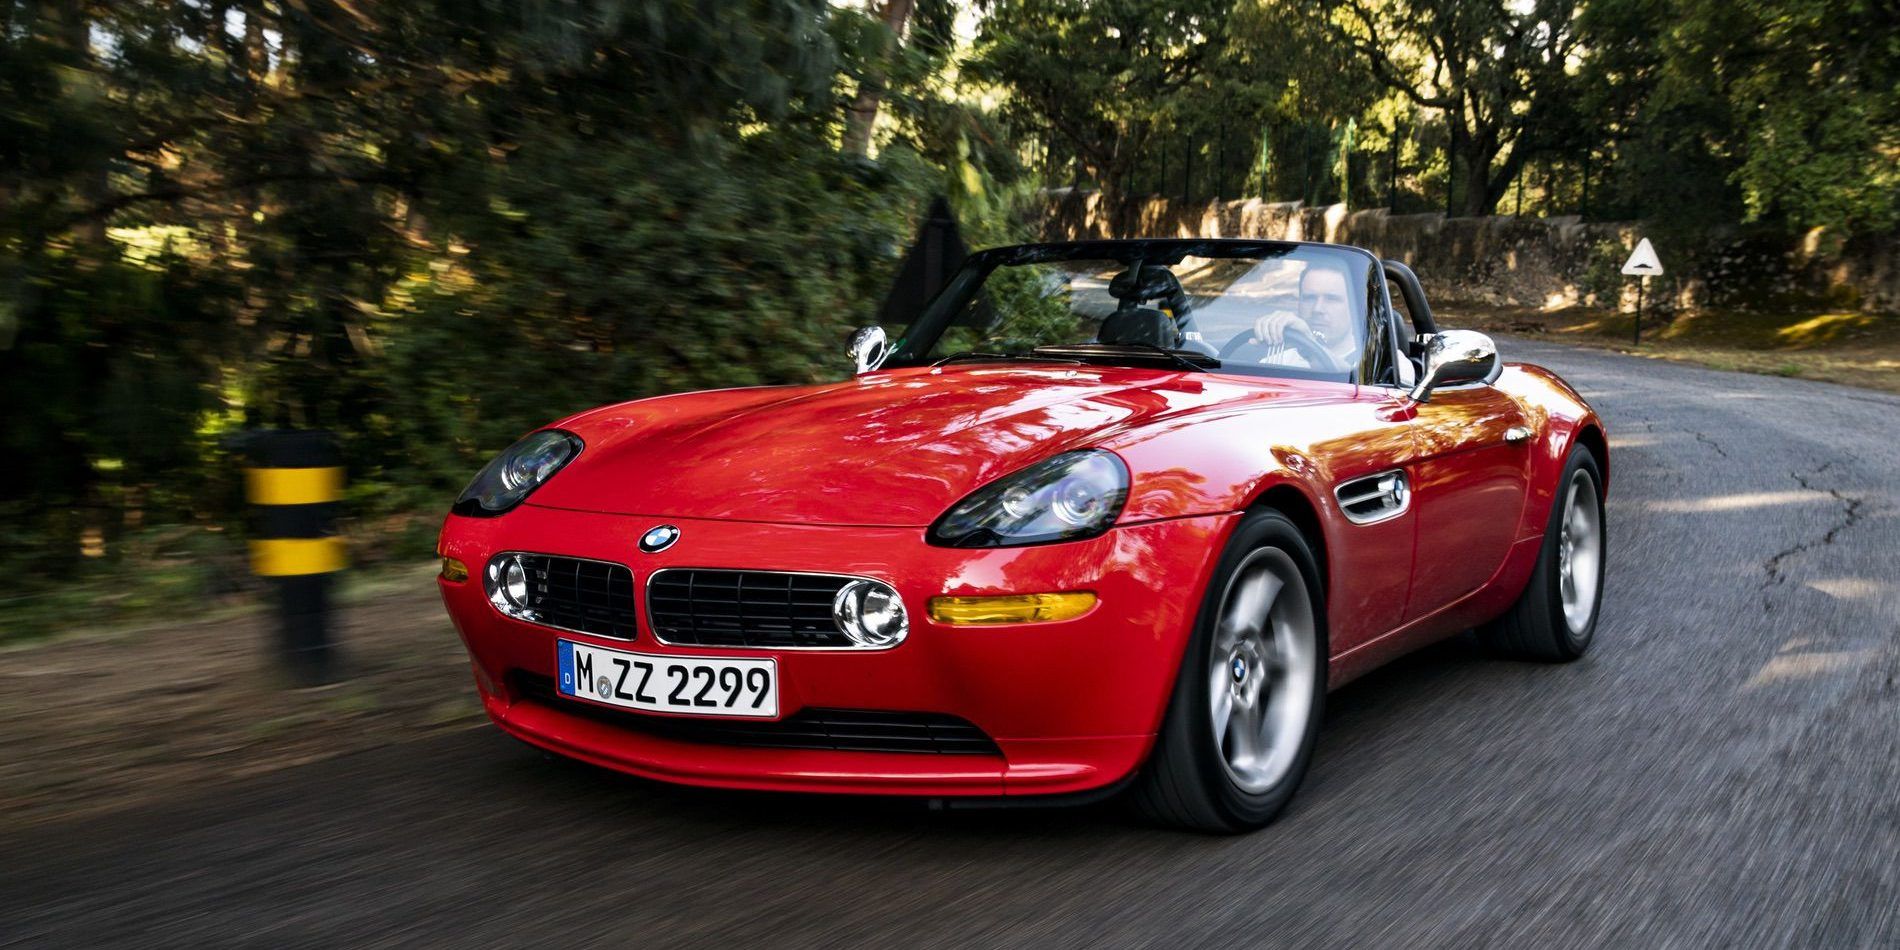 What Everyone Should Remember About The BMW Z8